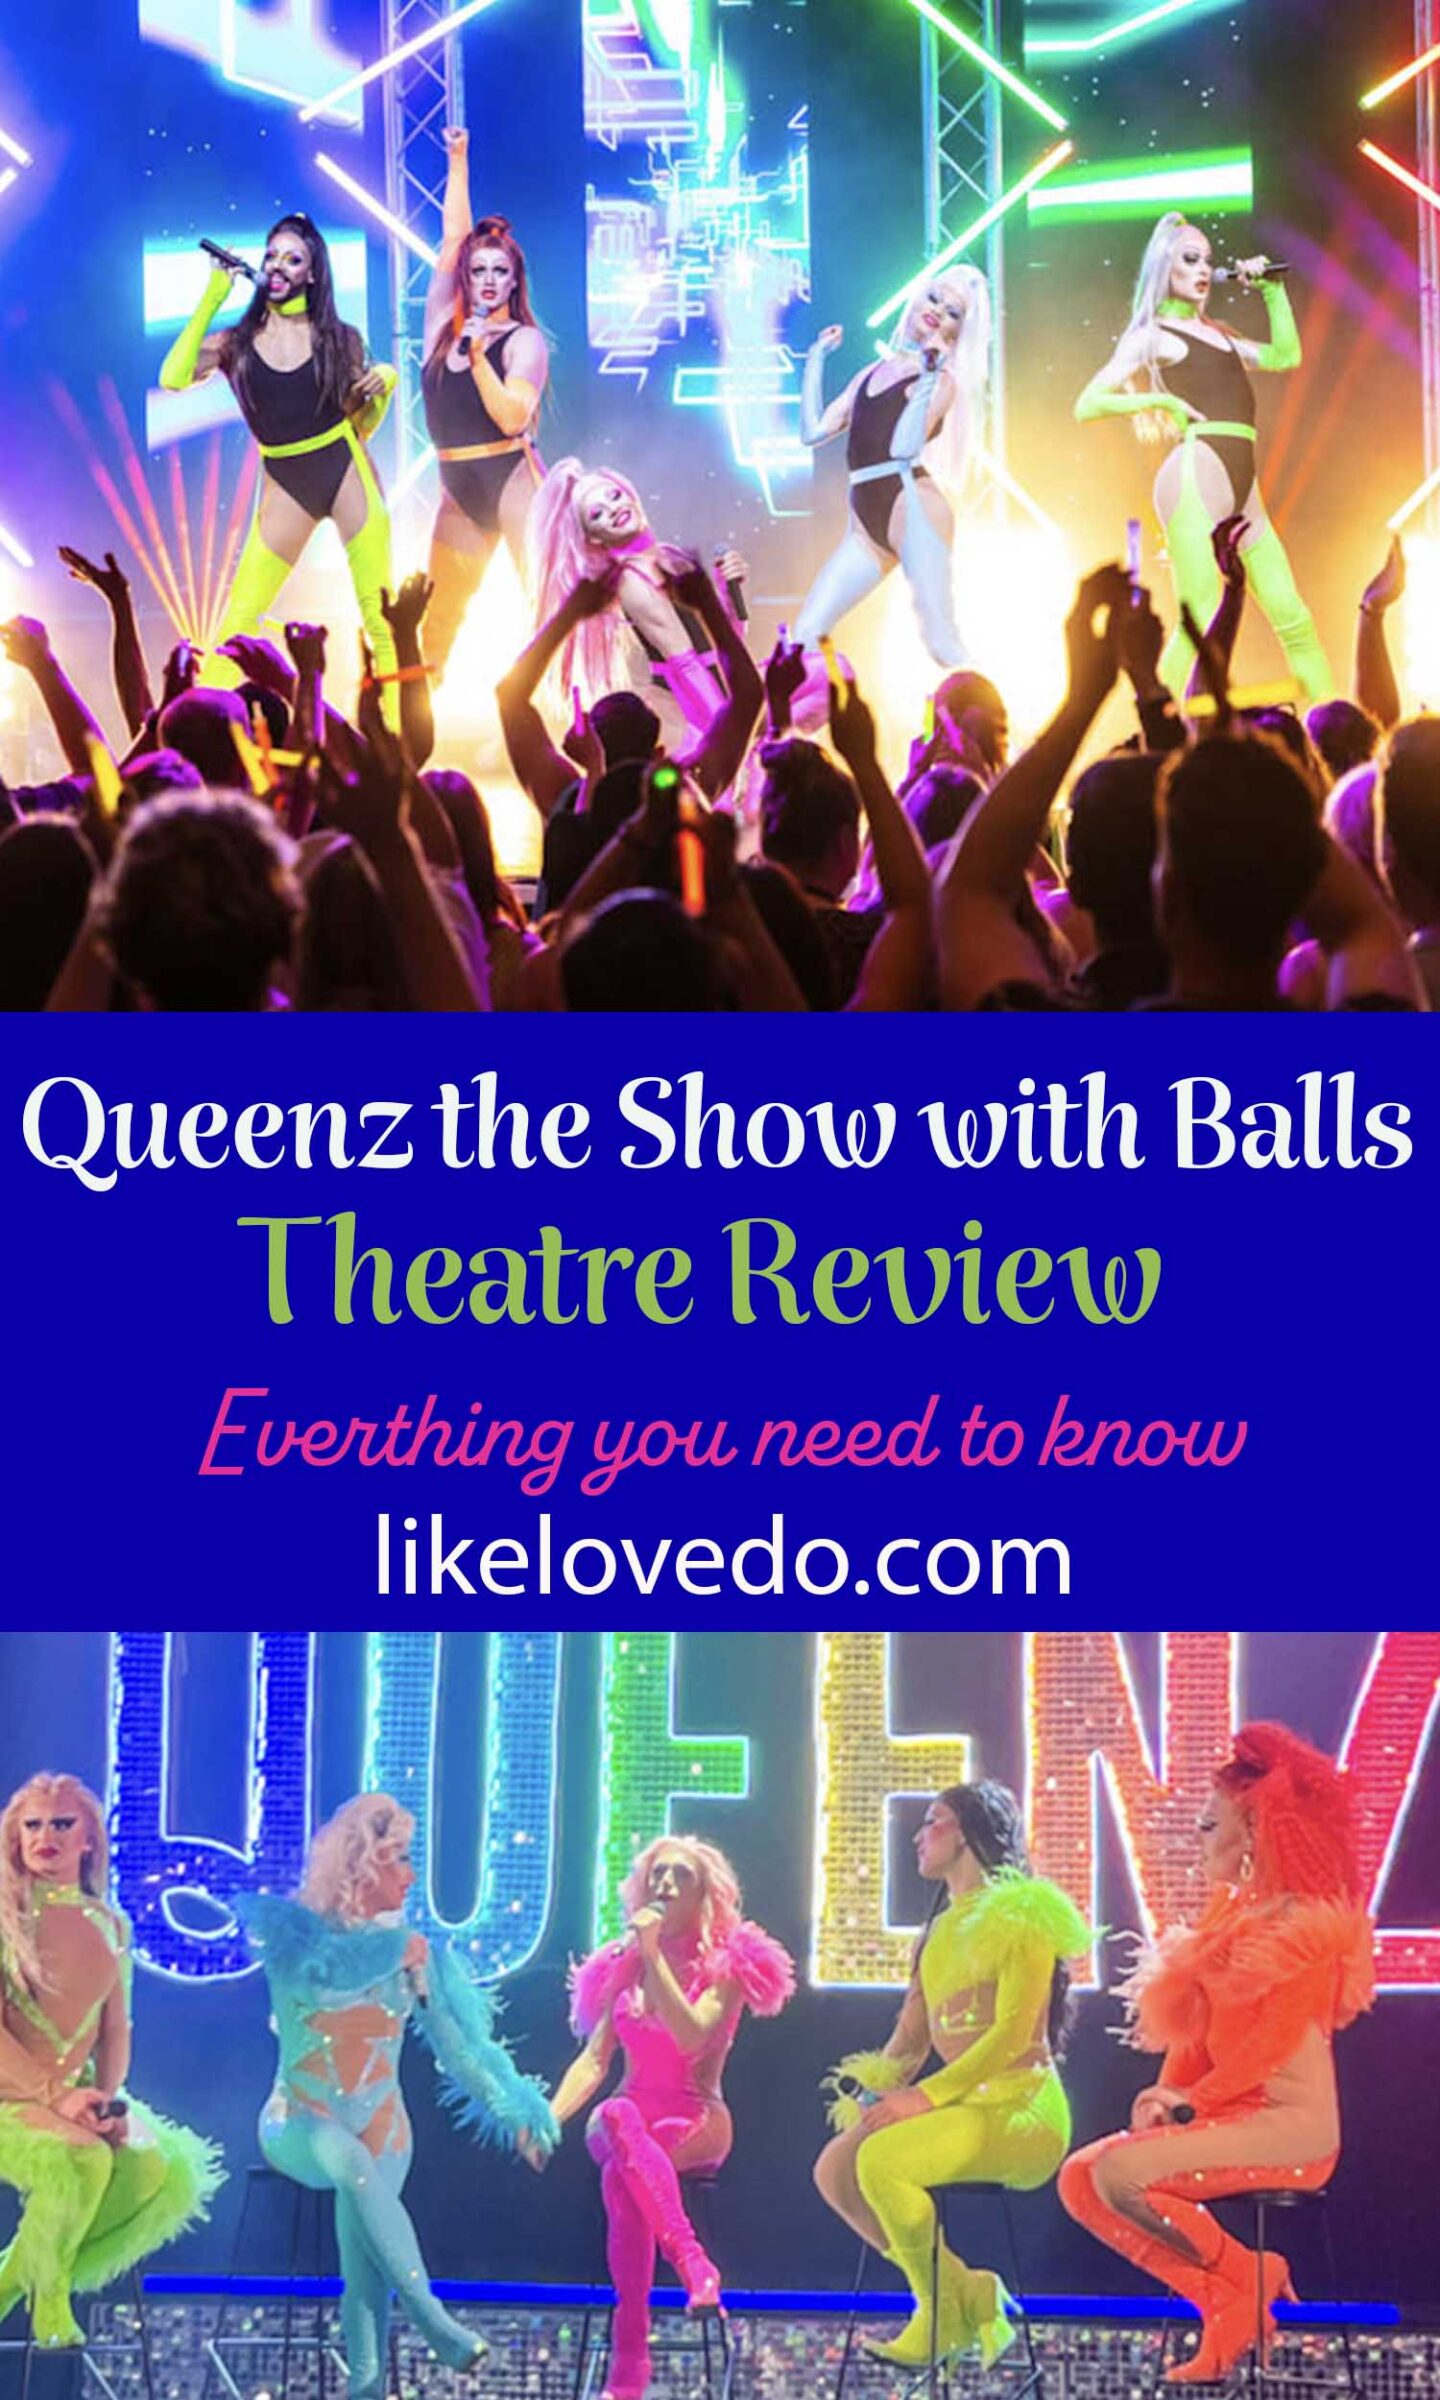 London review Queenz the show with balls! Everything you need to know before you book